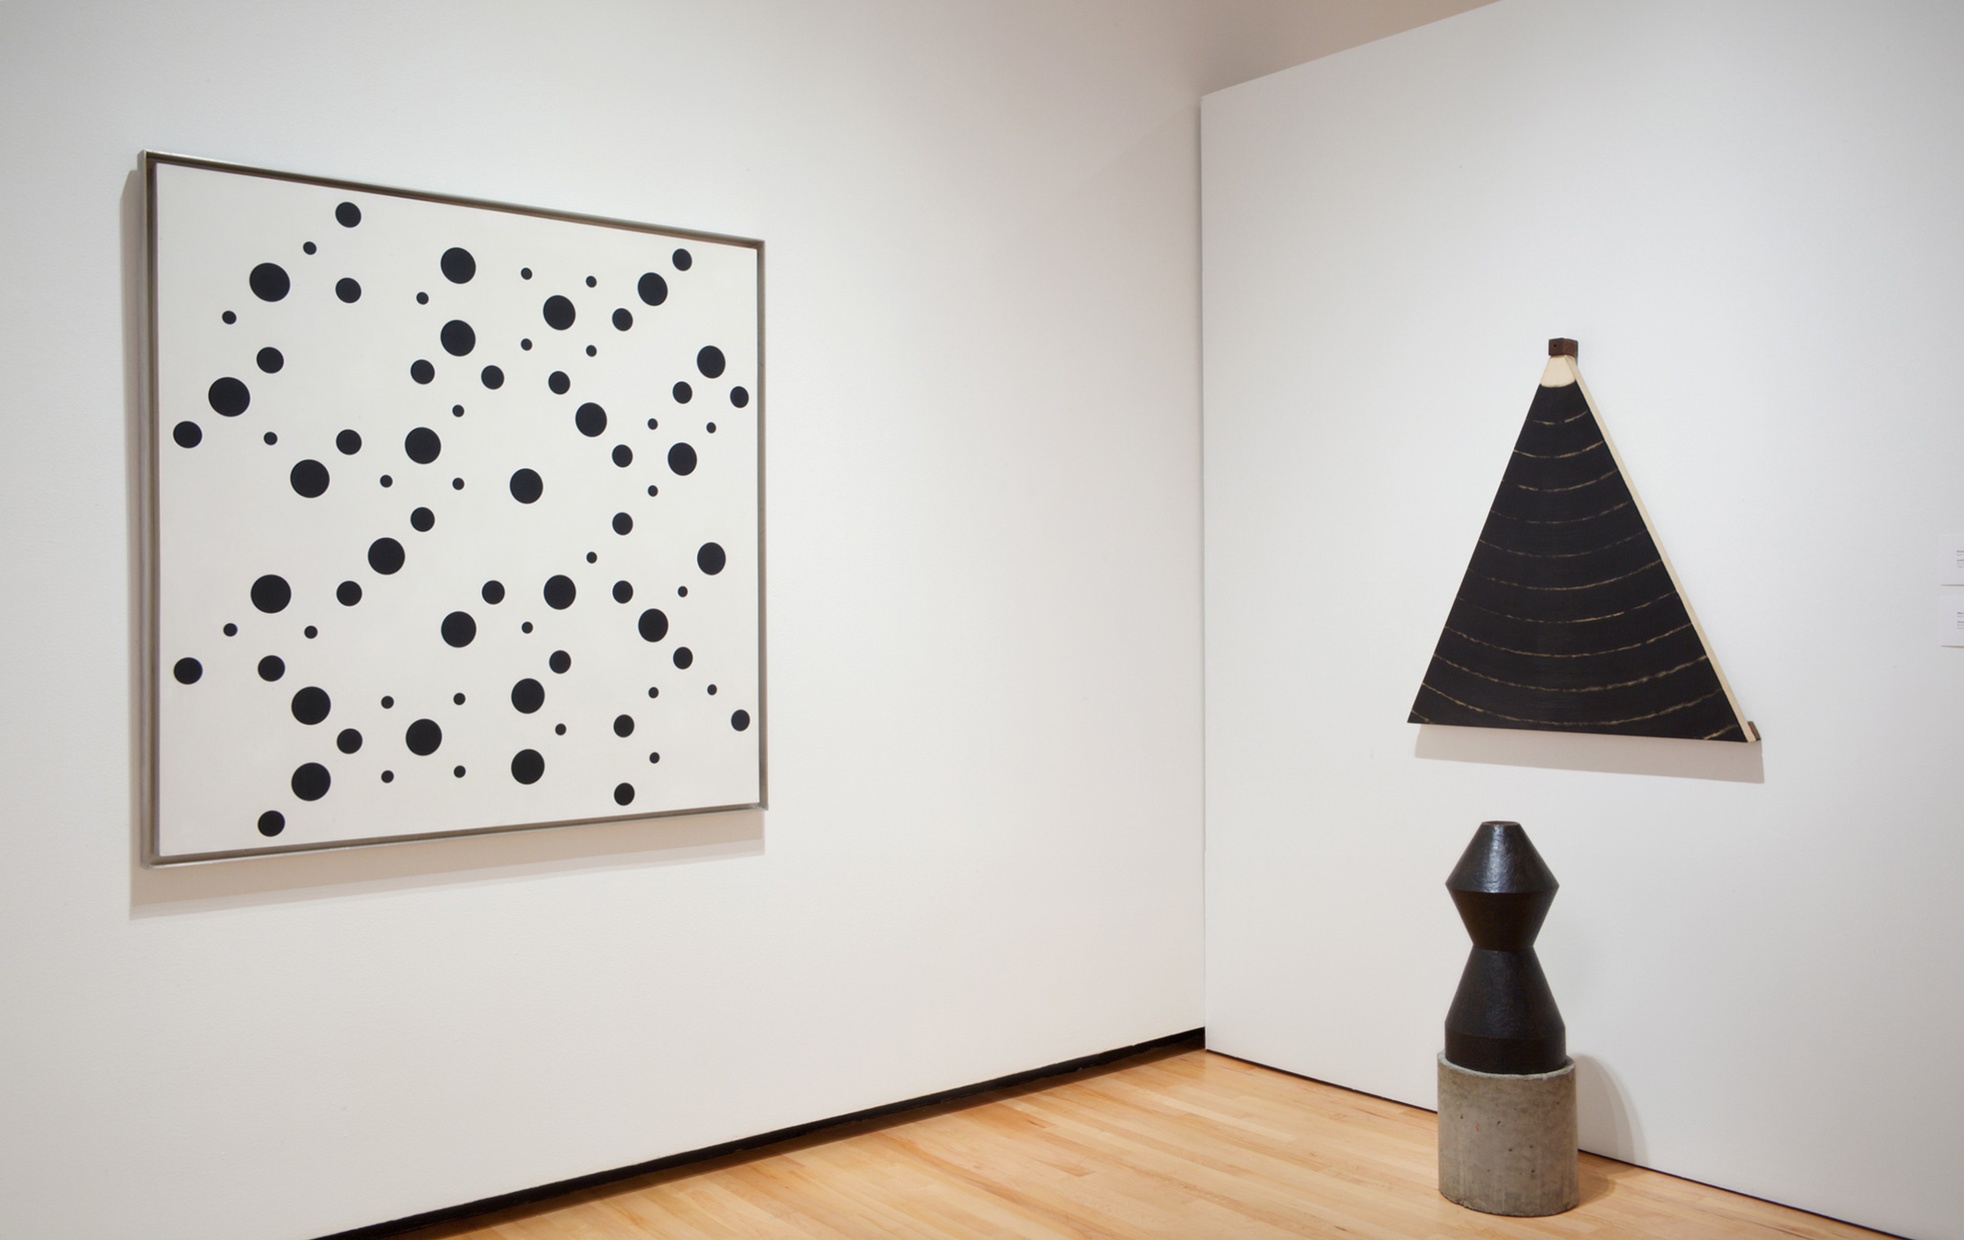 The corner of a room with a white painting with black dots hanging on one wall and a triangularly shaped painting hanging on the other wall with a sculpture below.